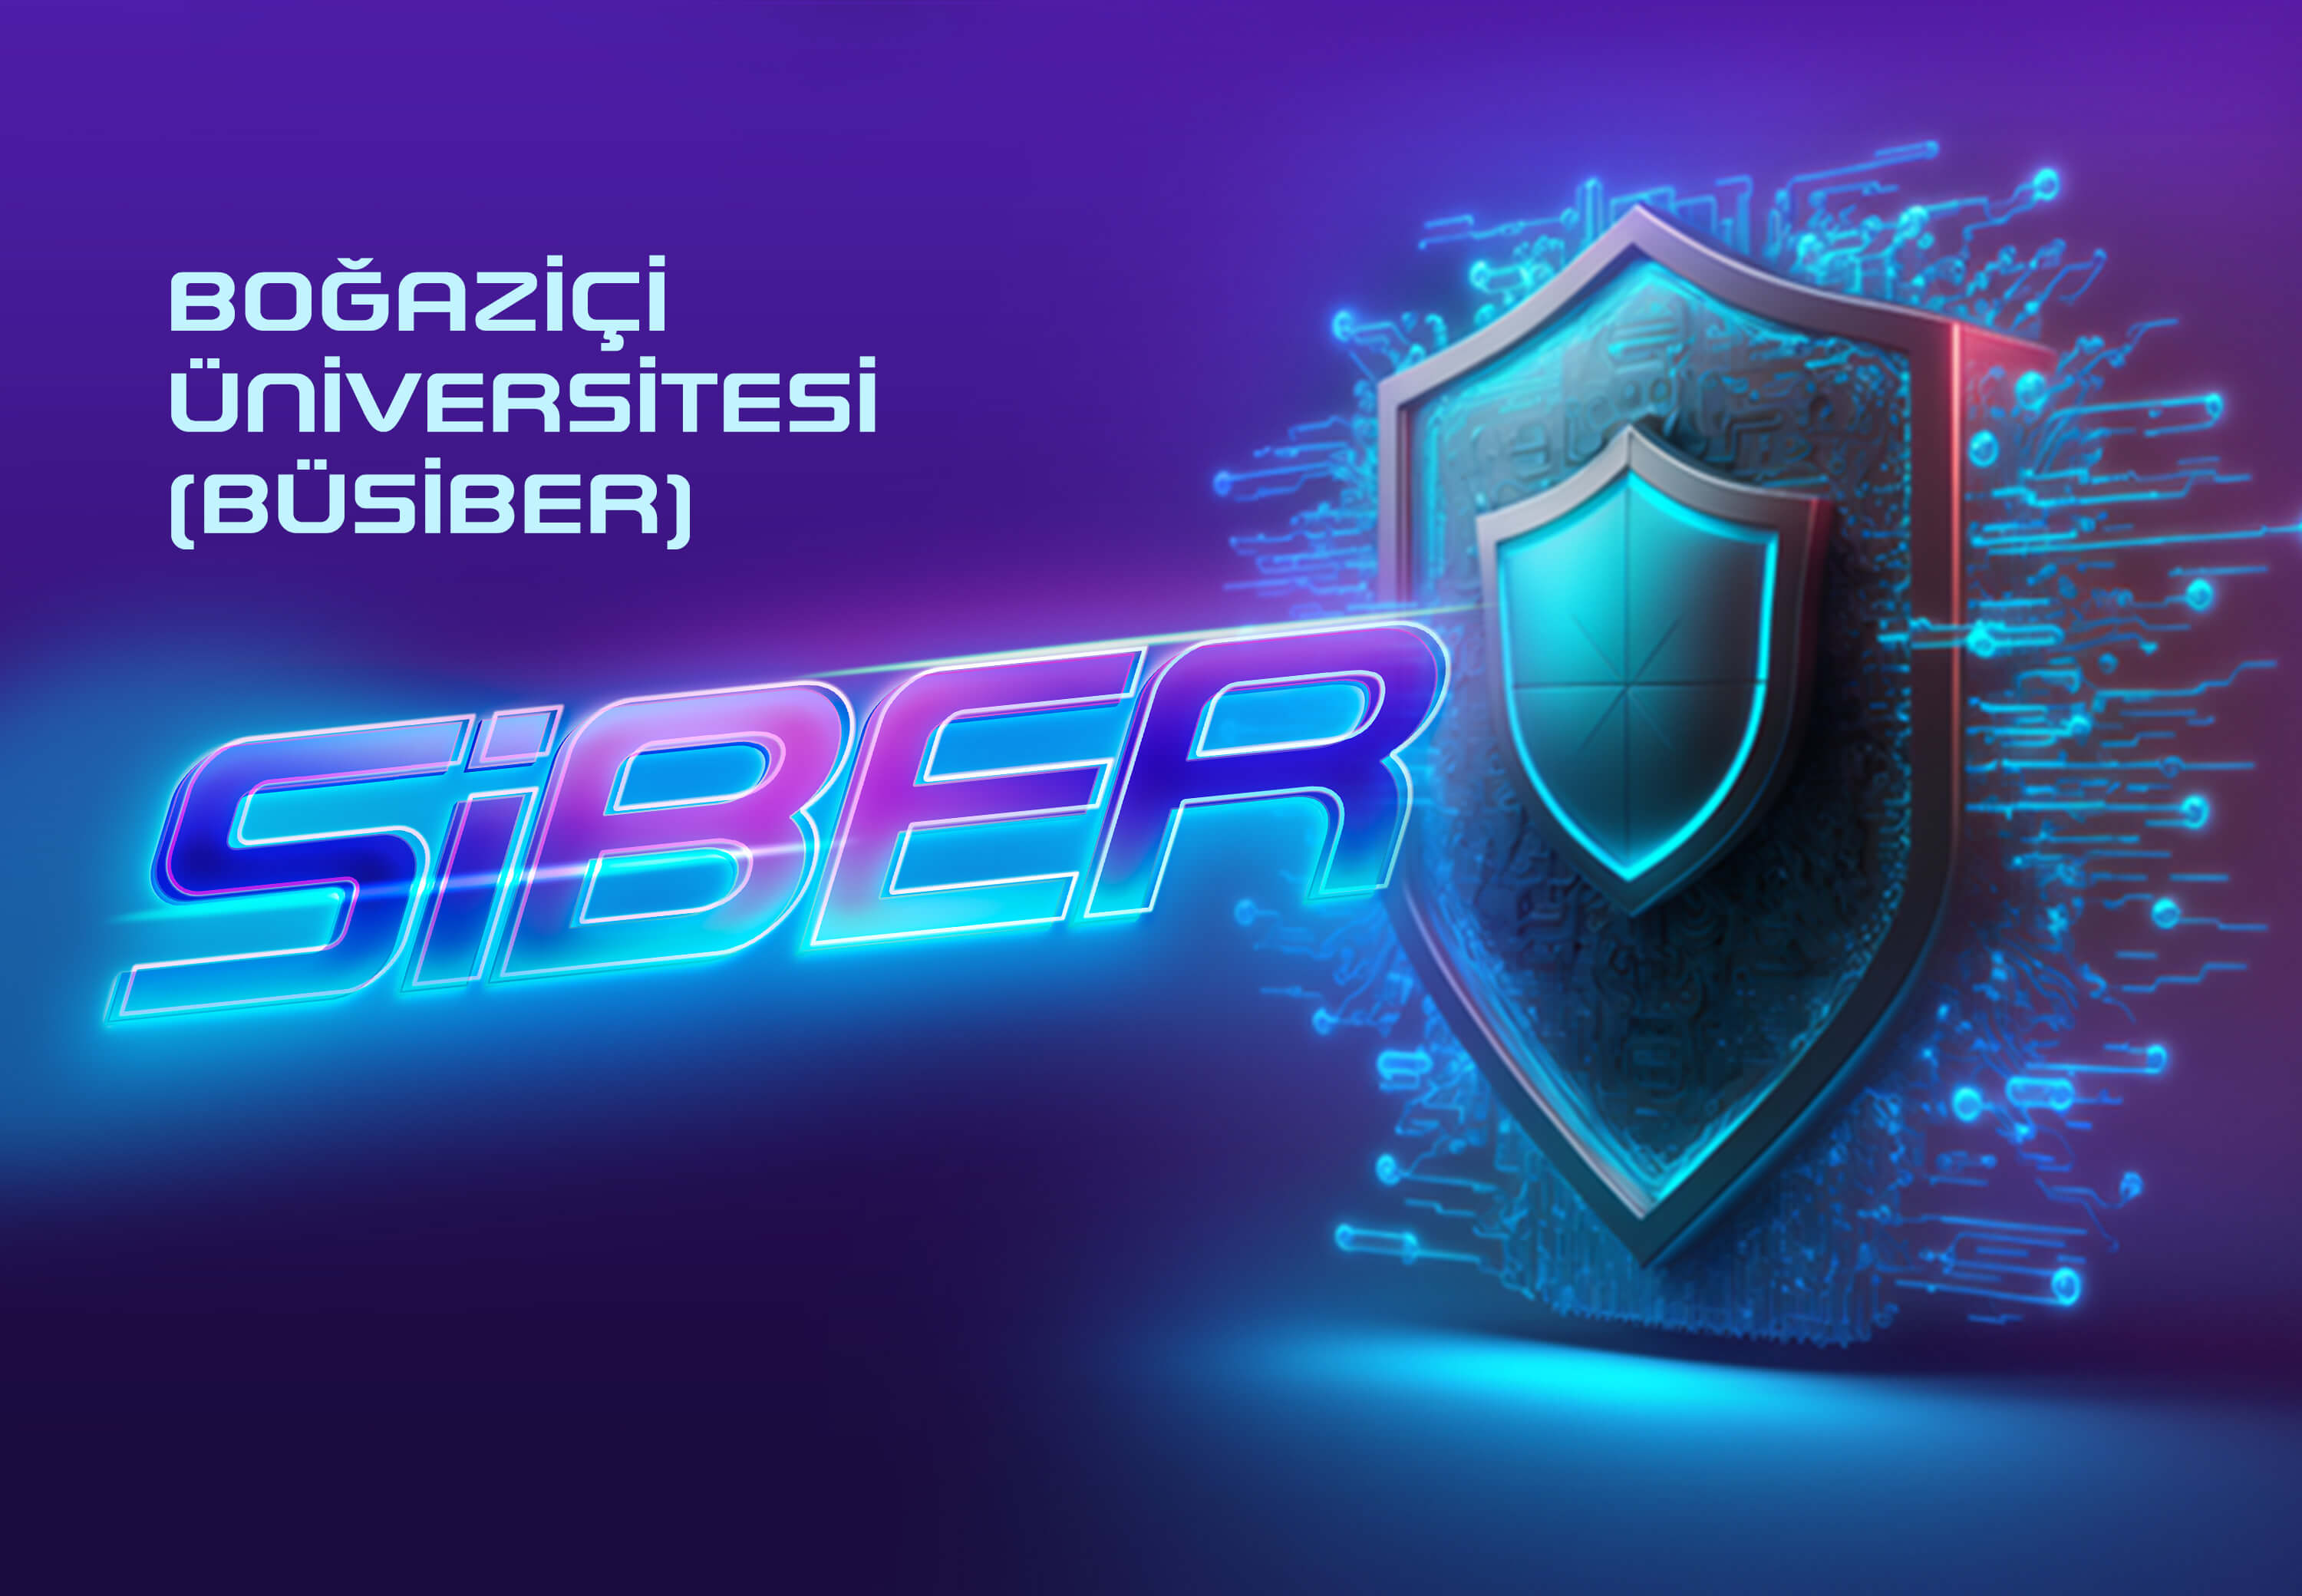 Step into the Future of Cyber Security!